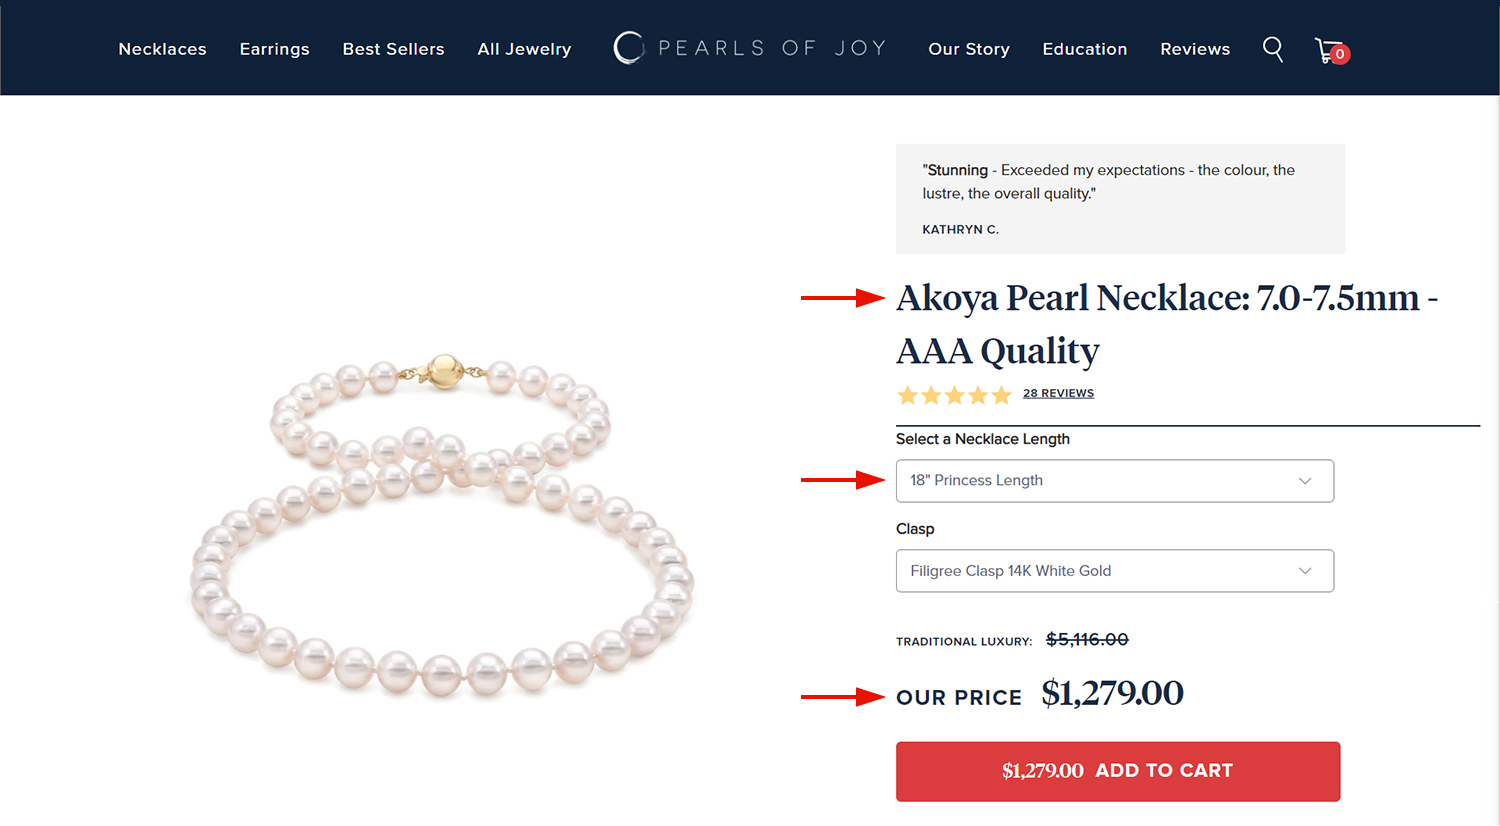 Akoya Pearl Necklace measuring 7.0-7.5mm from Pearls of Joy